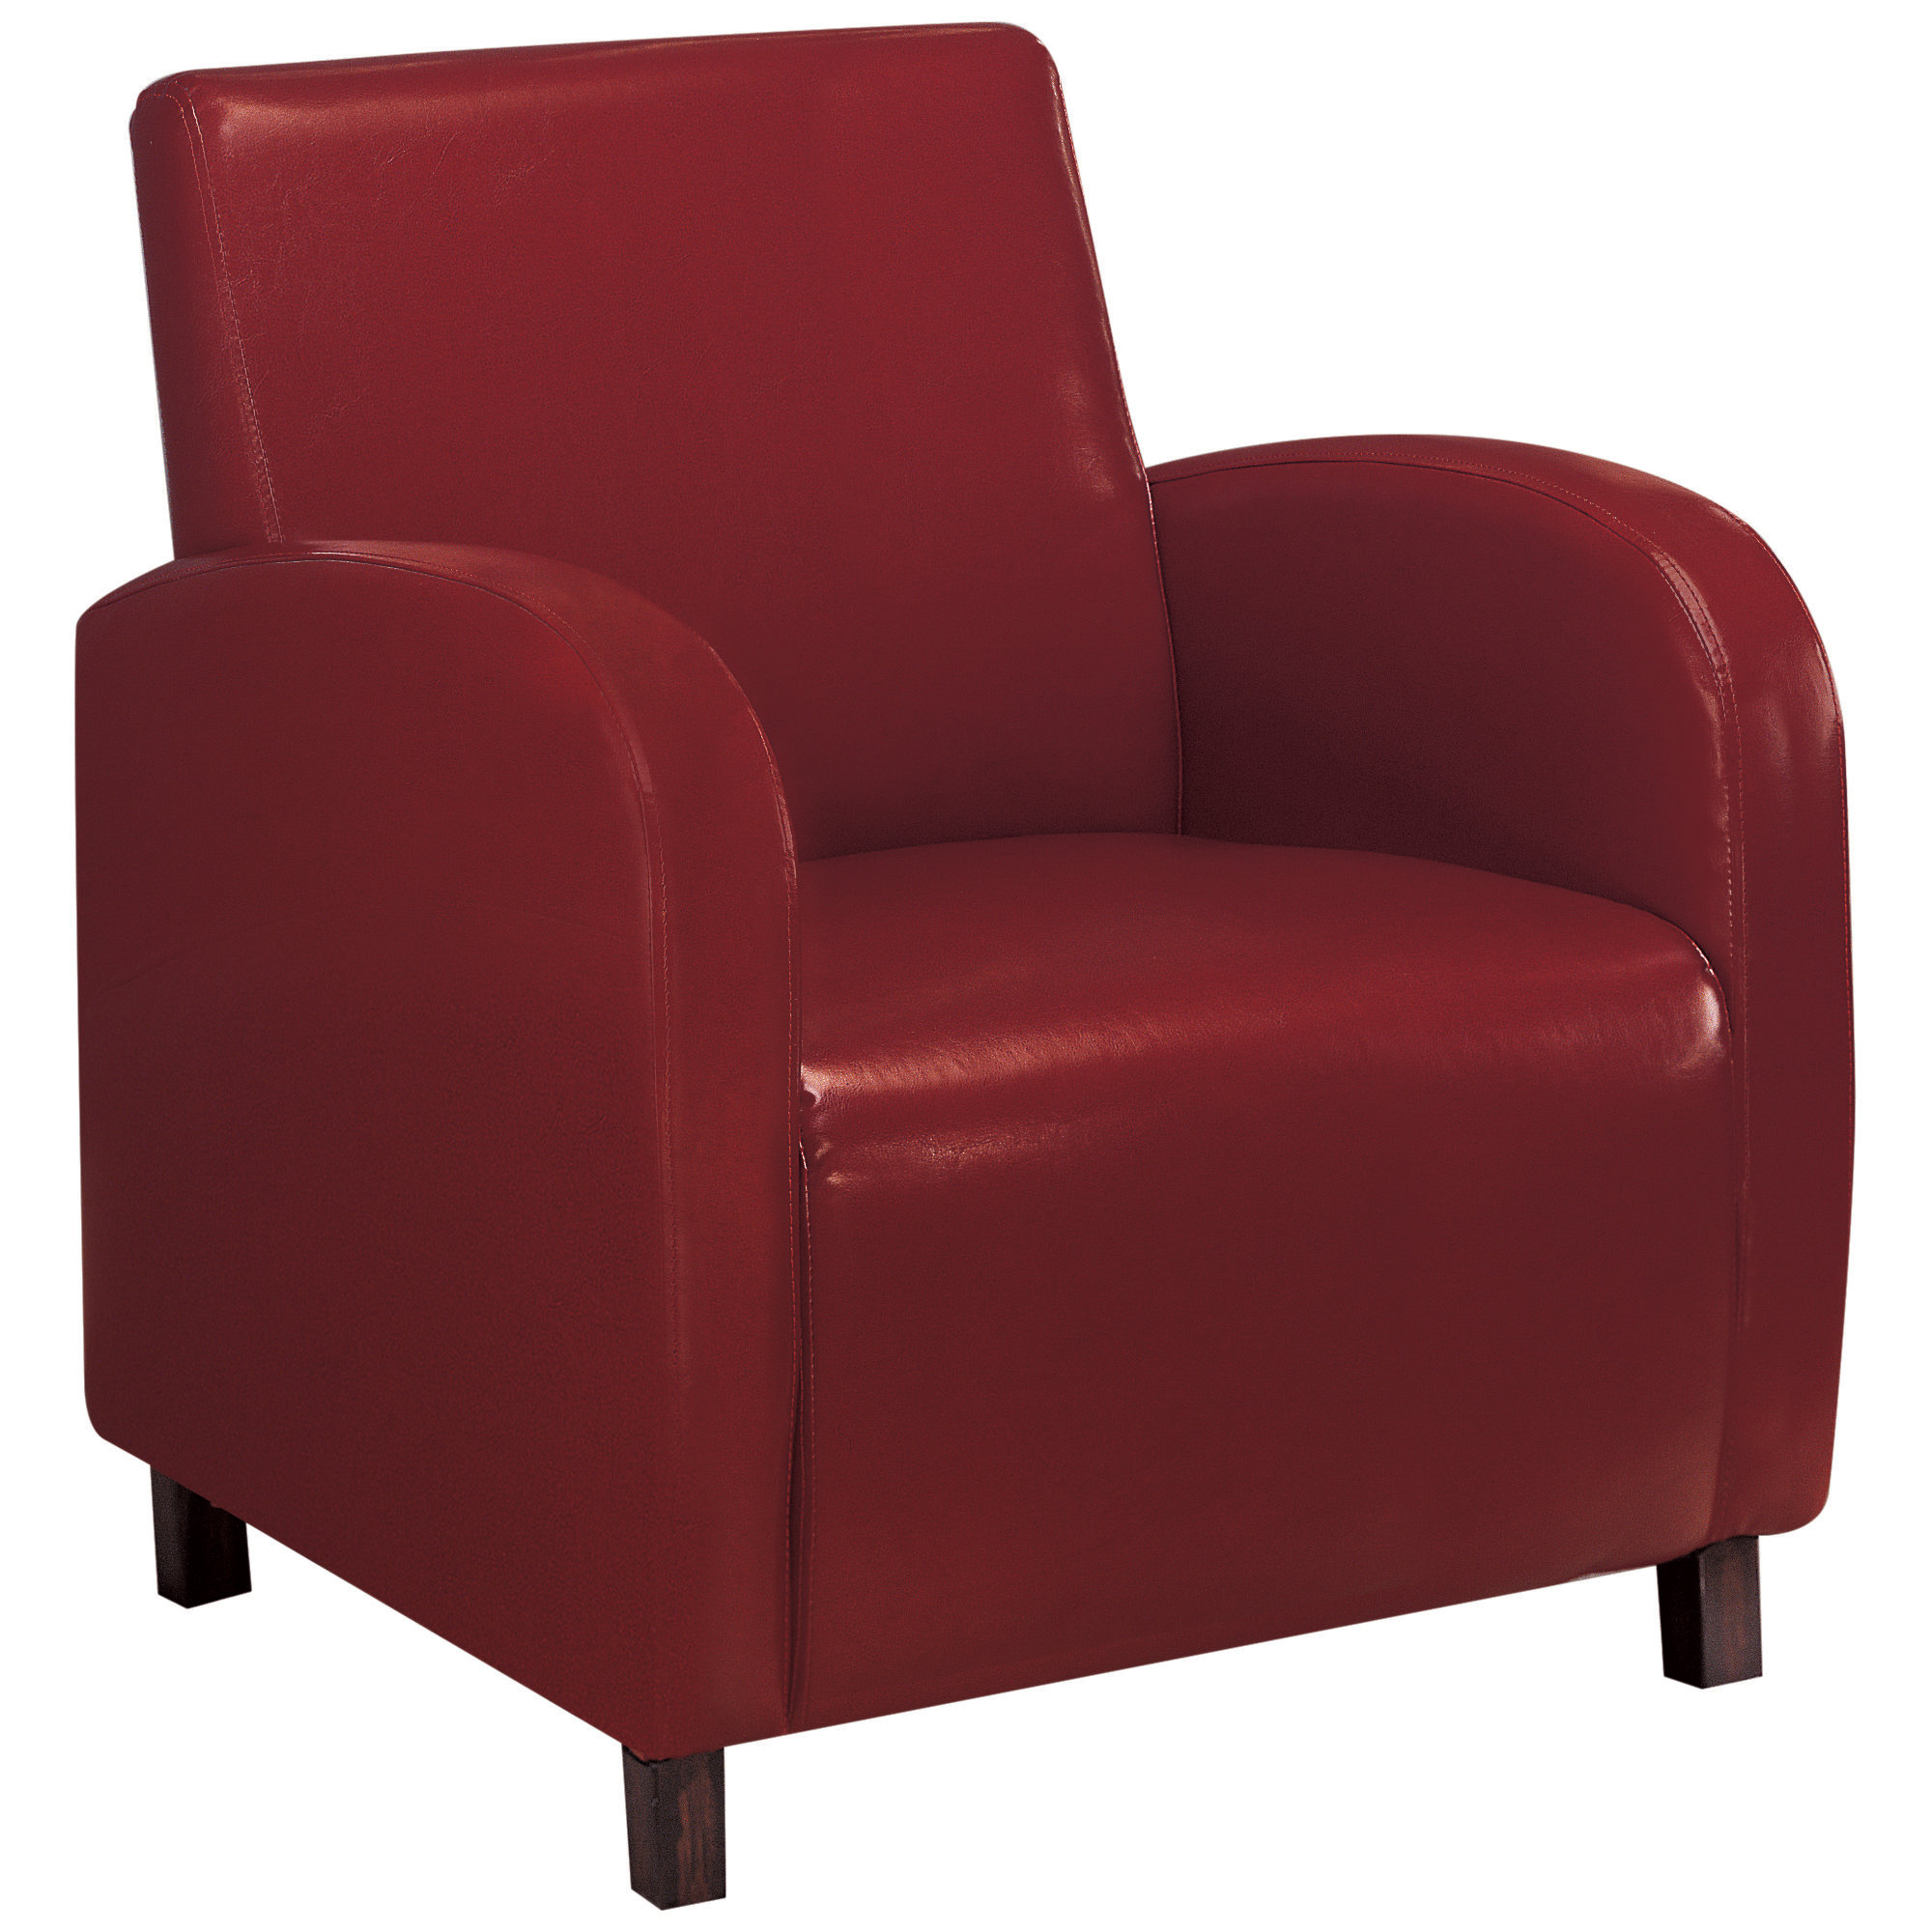 29" x 27.5" x 32.5" Red Leather-Look Foam Accent Chair with Solid Wood Frame